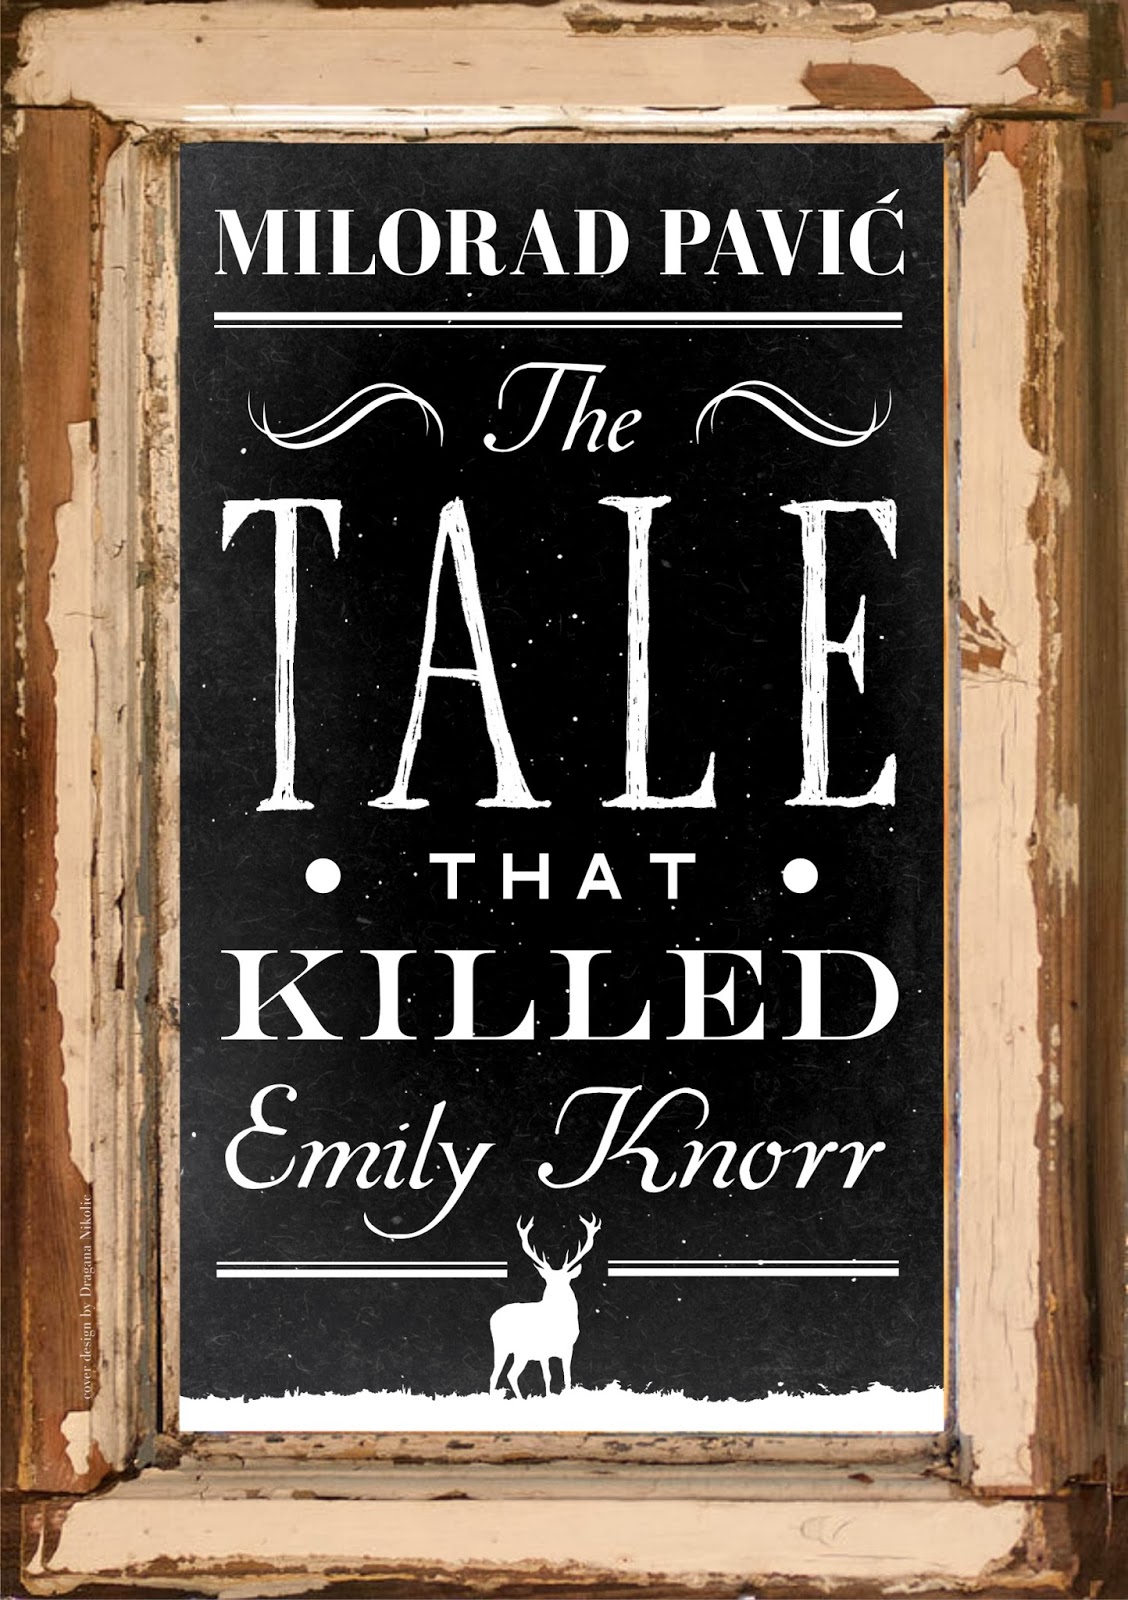 http://www.amazon.com/Tale-That-Killed-Emily-Knorr-ebook/dp/B007R0NSSW